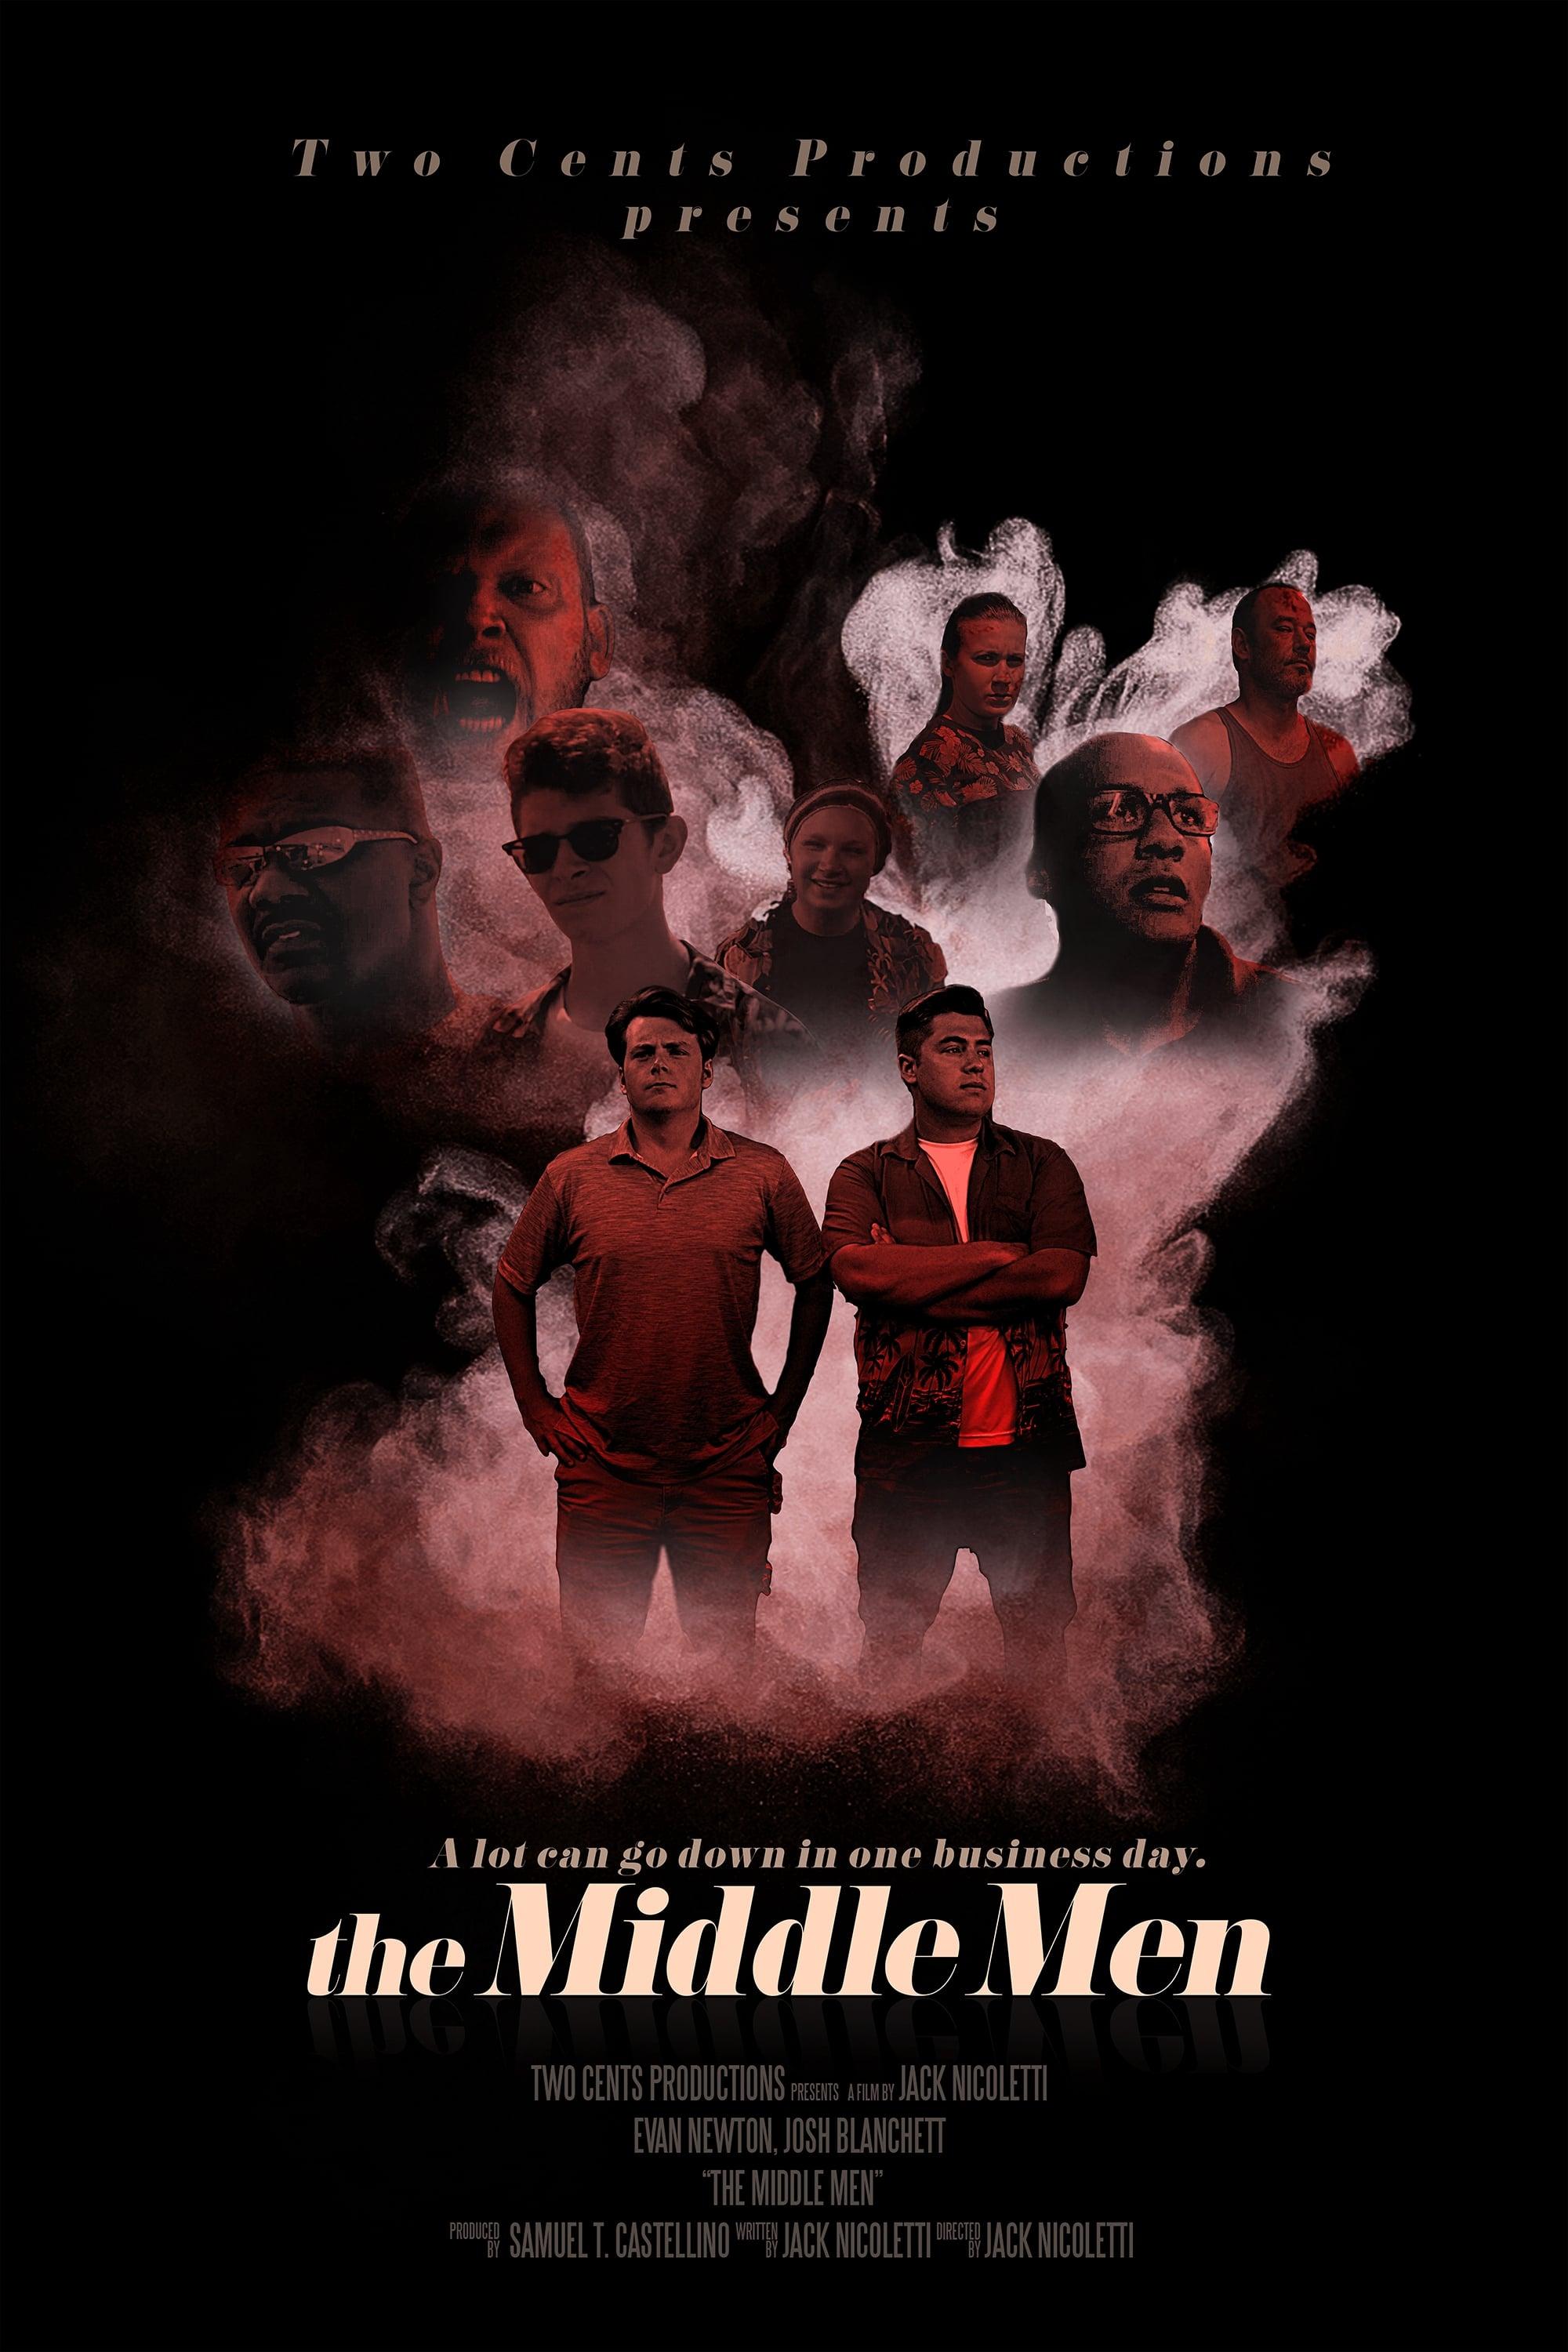 The Middle Men poster